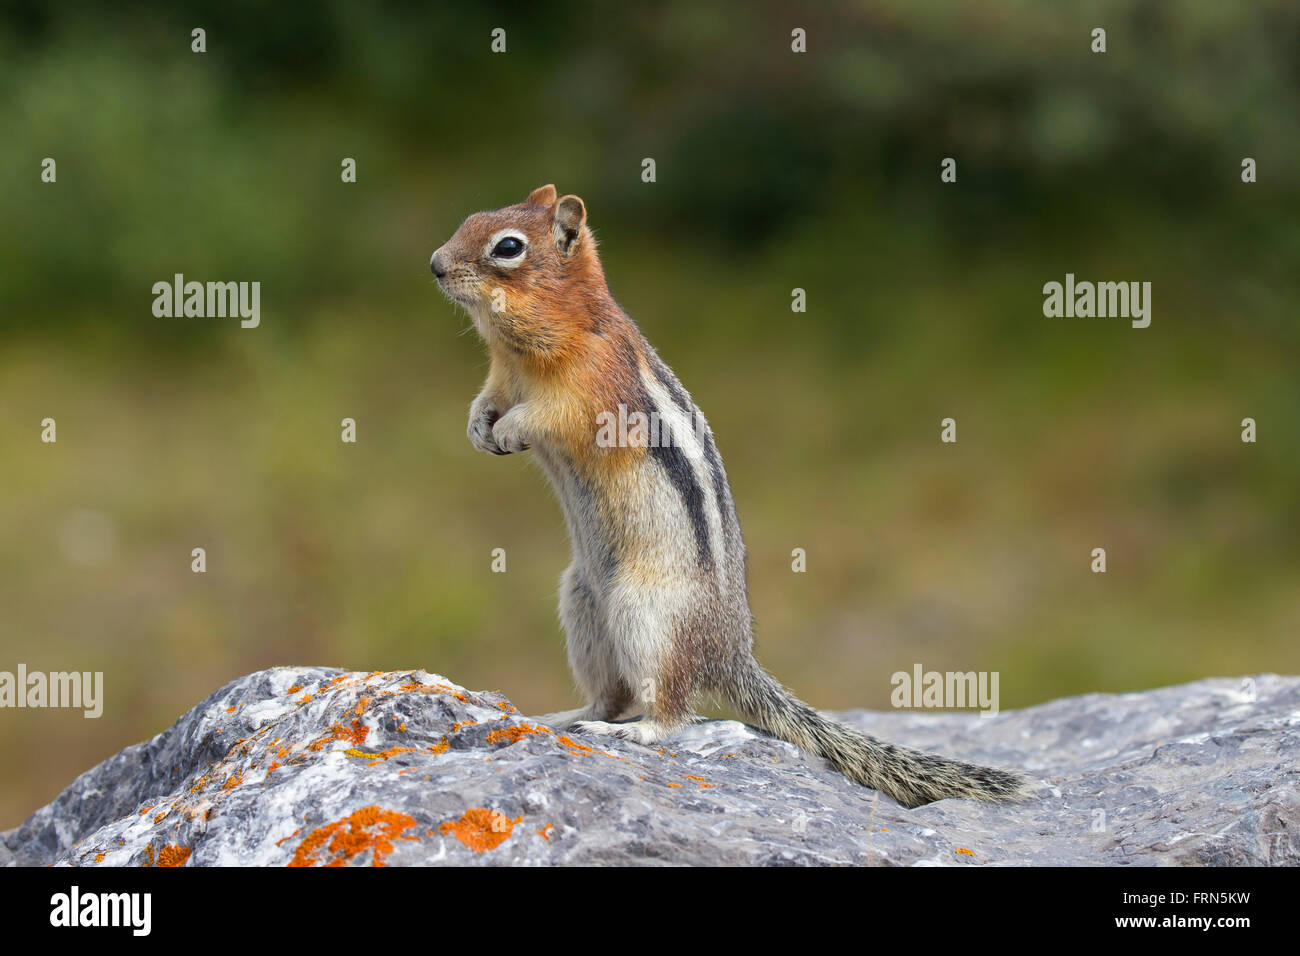 Golden-mantled ground squirrel (Callospermophilus lateralis) standing upright on rock, native to western North America Stock Photo